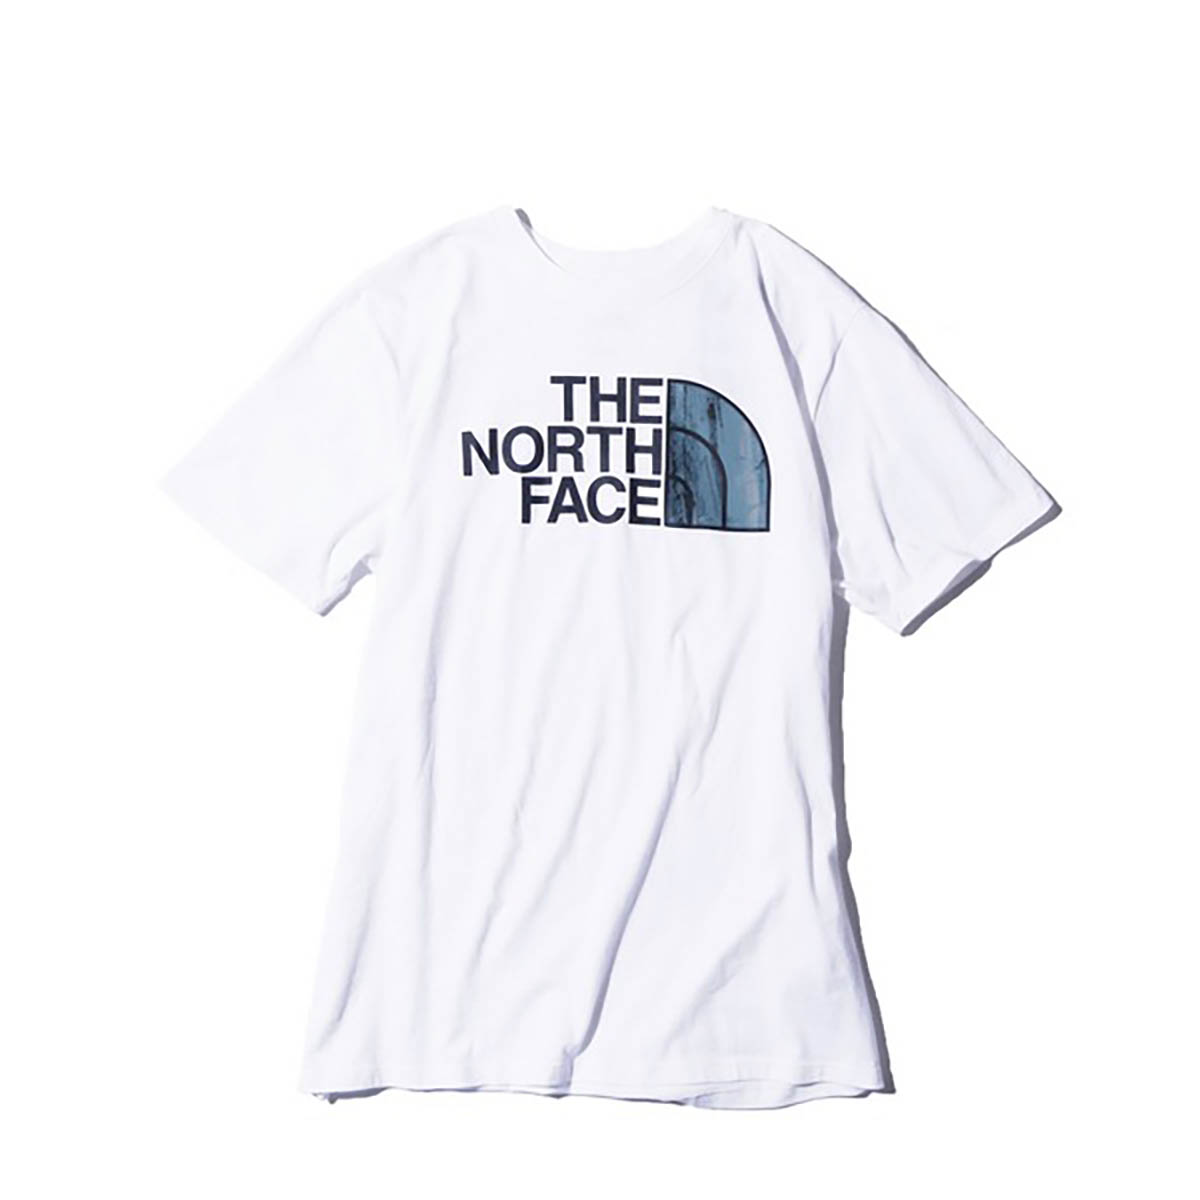 THE NORTH FACE ザ・ノース・フェイス Tシャツ NF0A4M4P Short Slee...